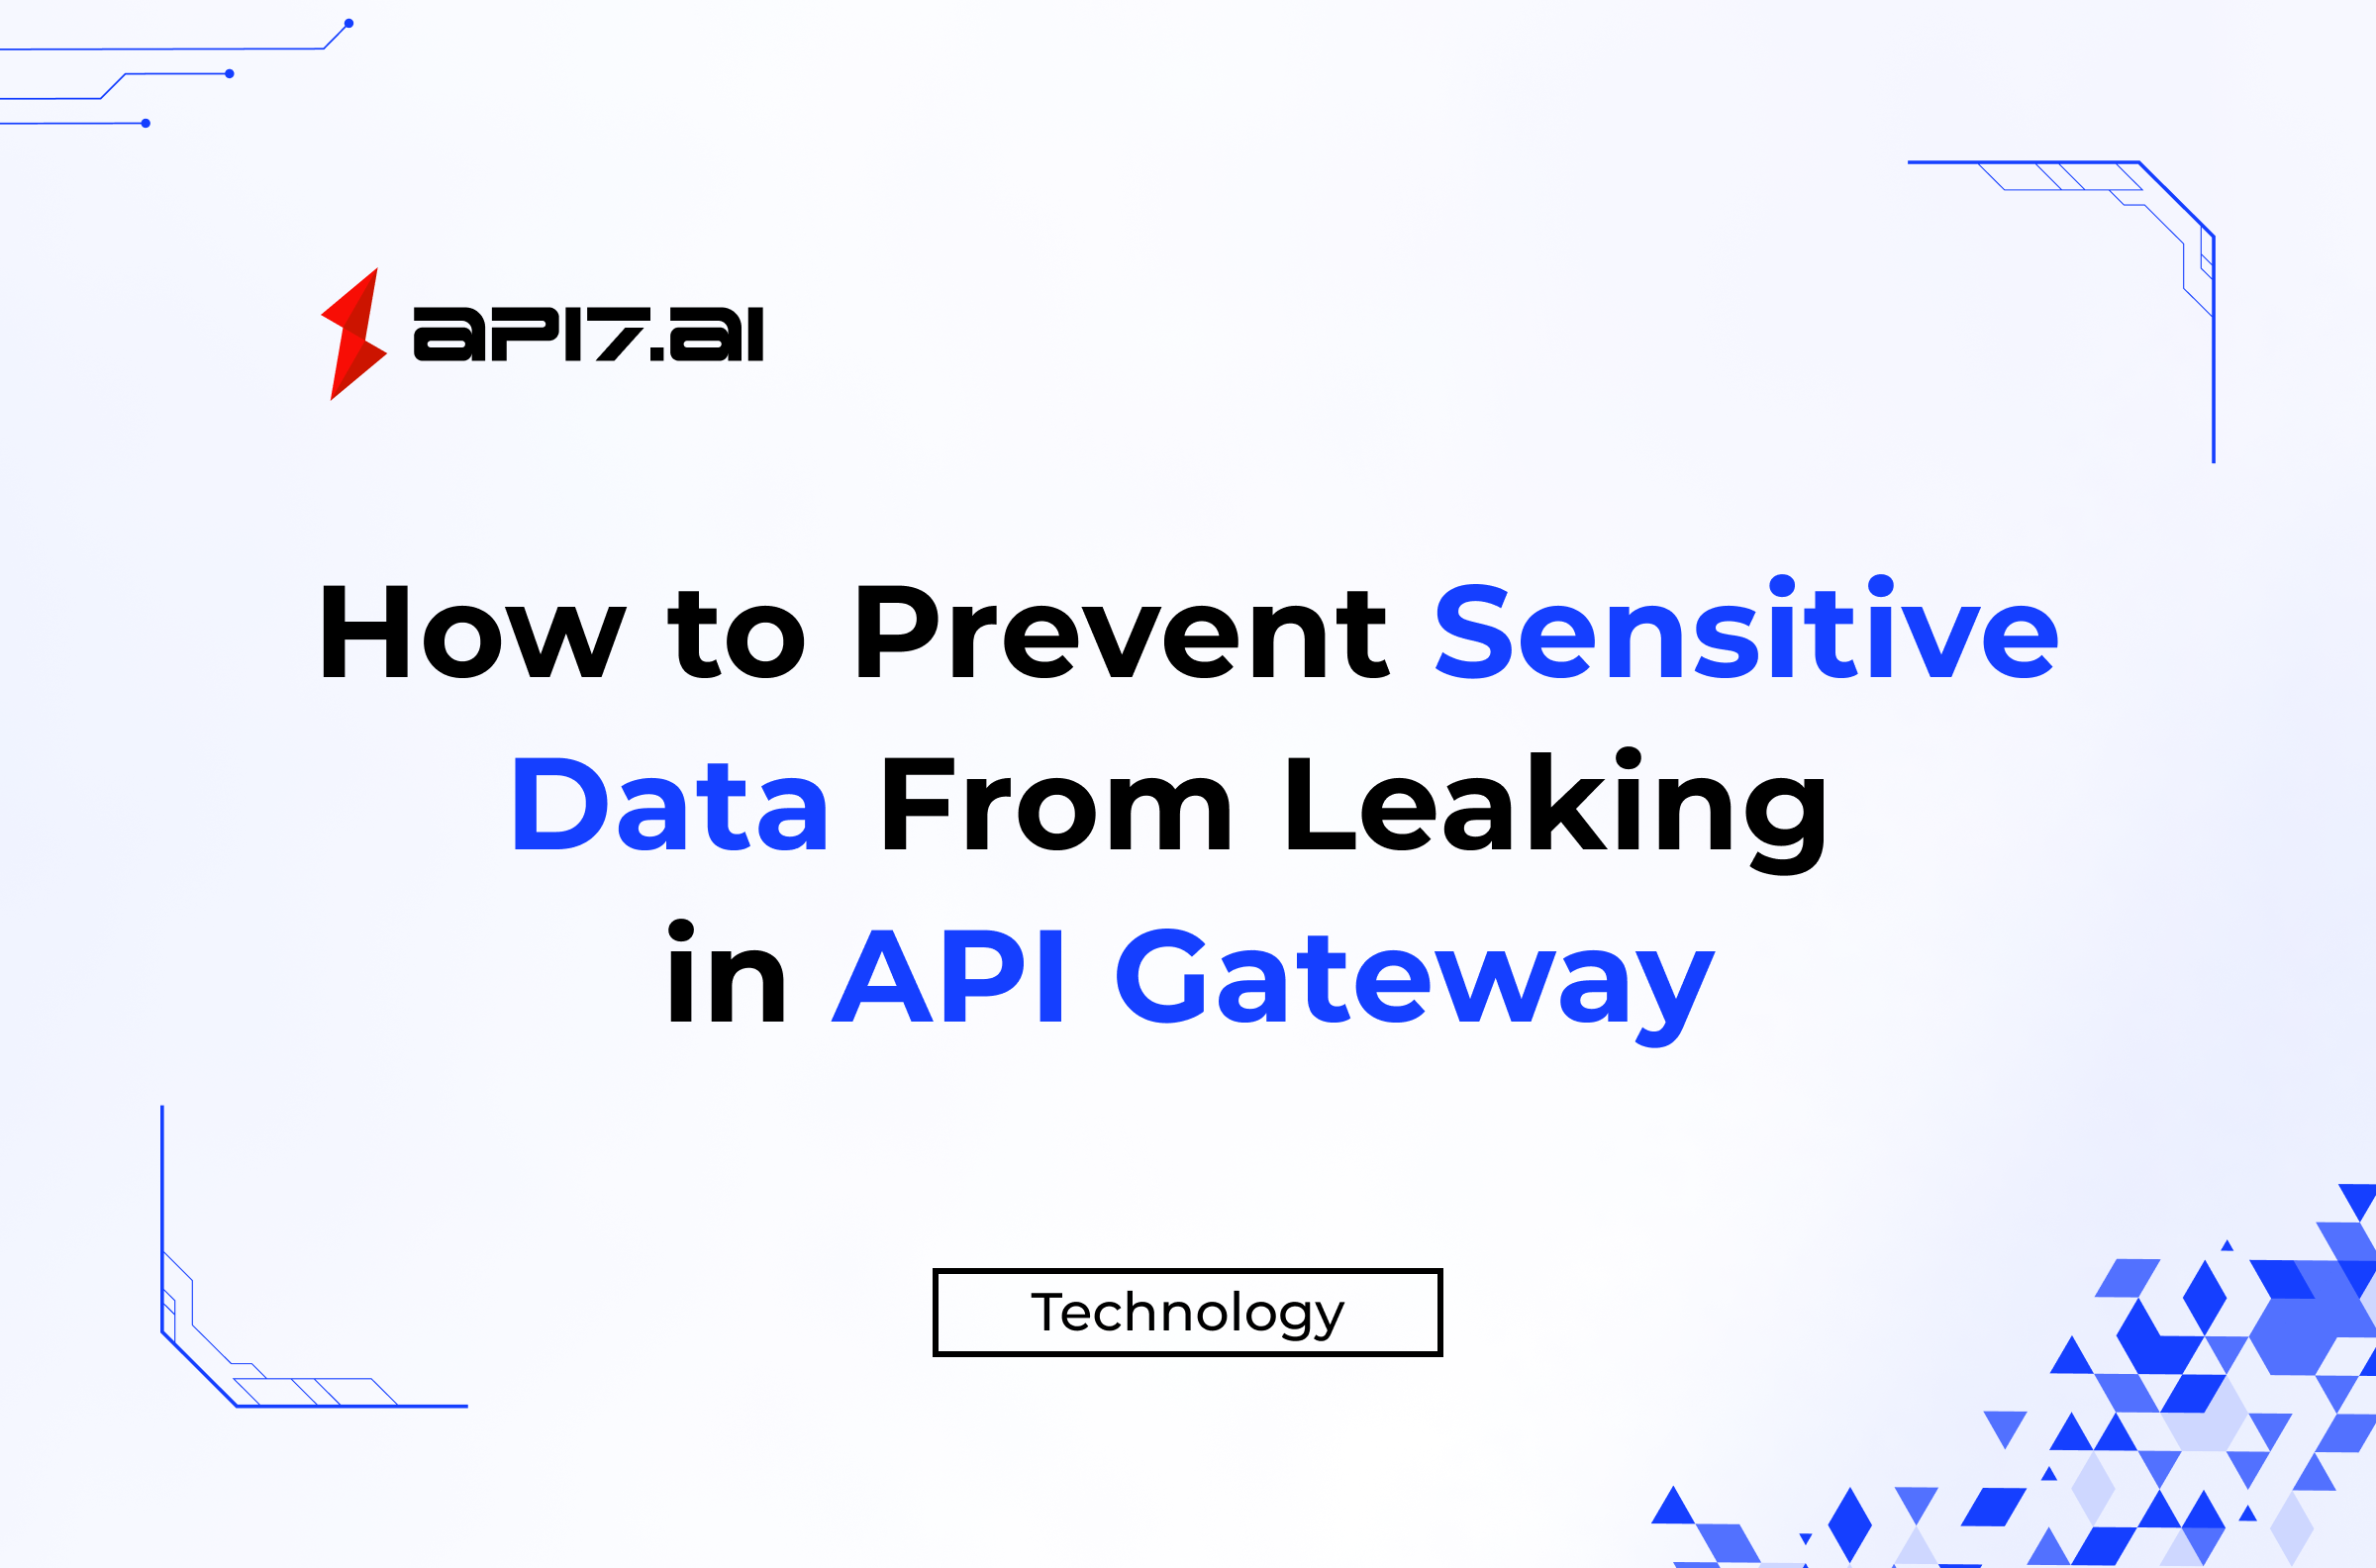 How to Prevent Sensitive Data From Leaking in API Gateway